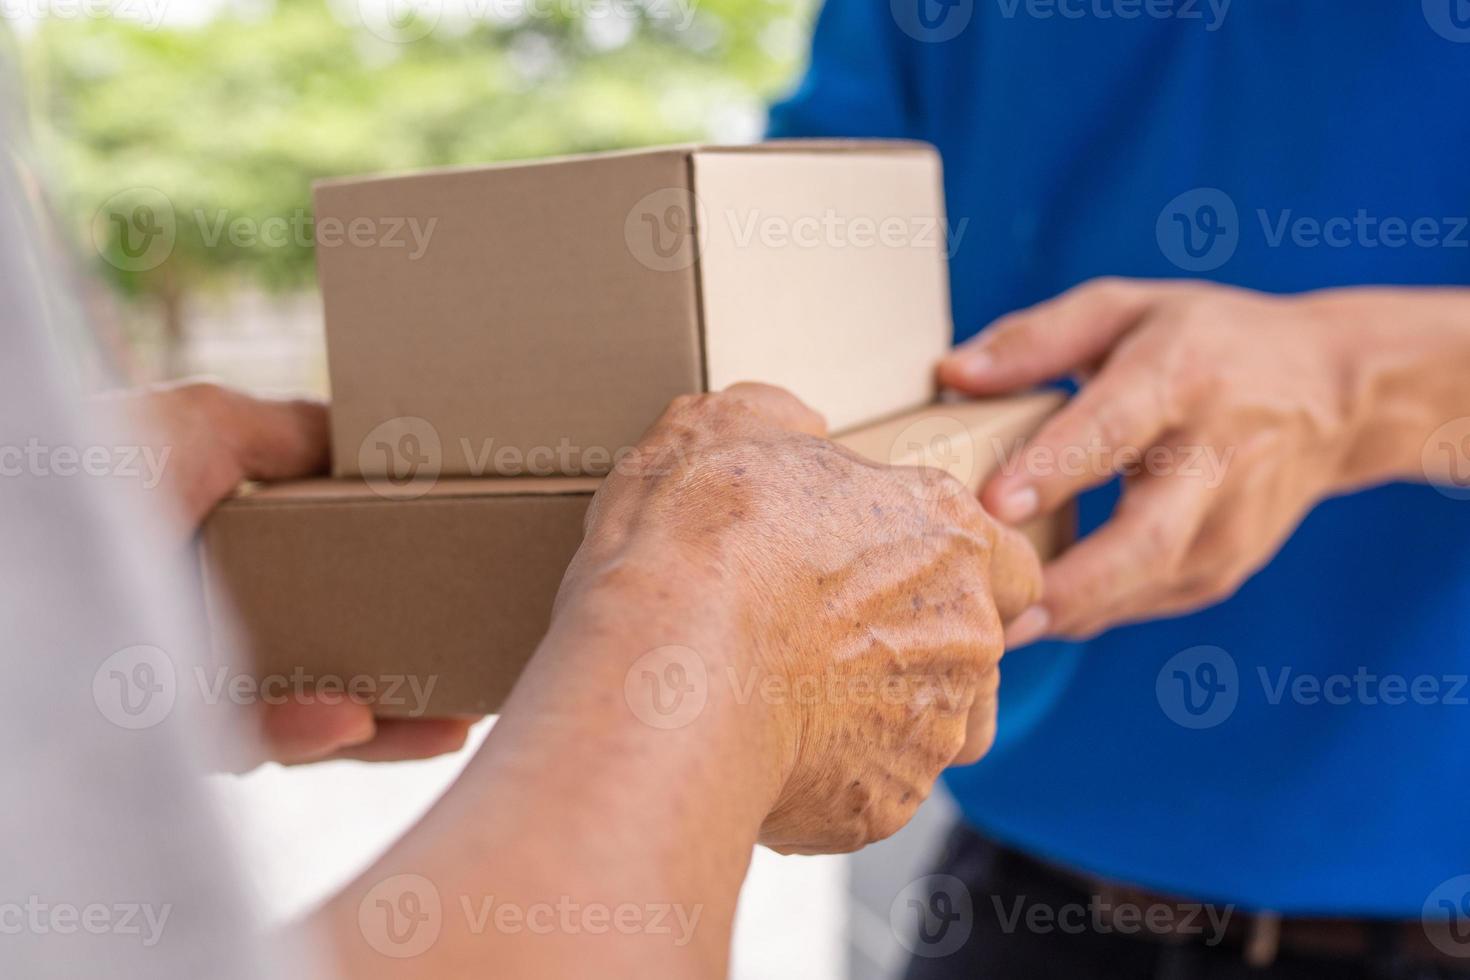 Deliver packages to recipients quickly, complete products, impressive services. photo